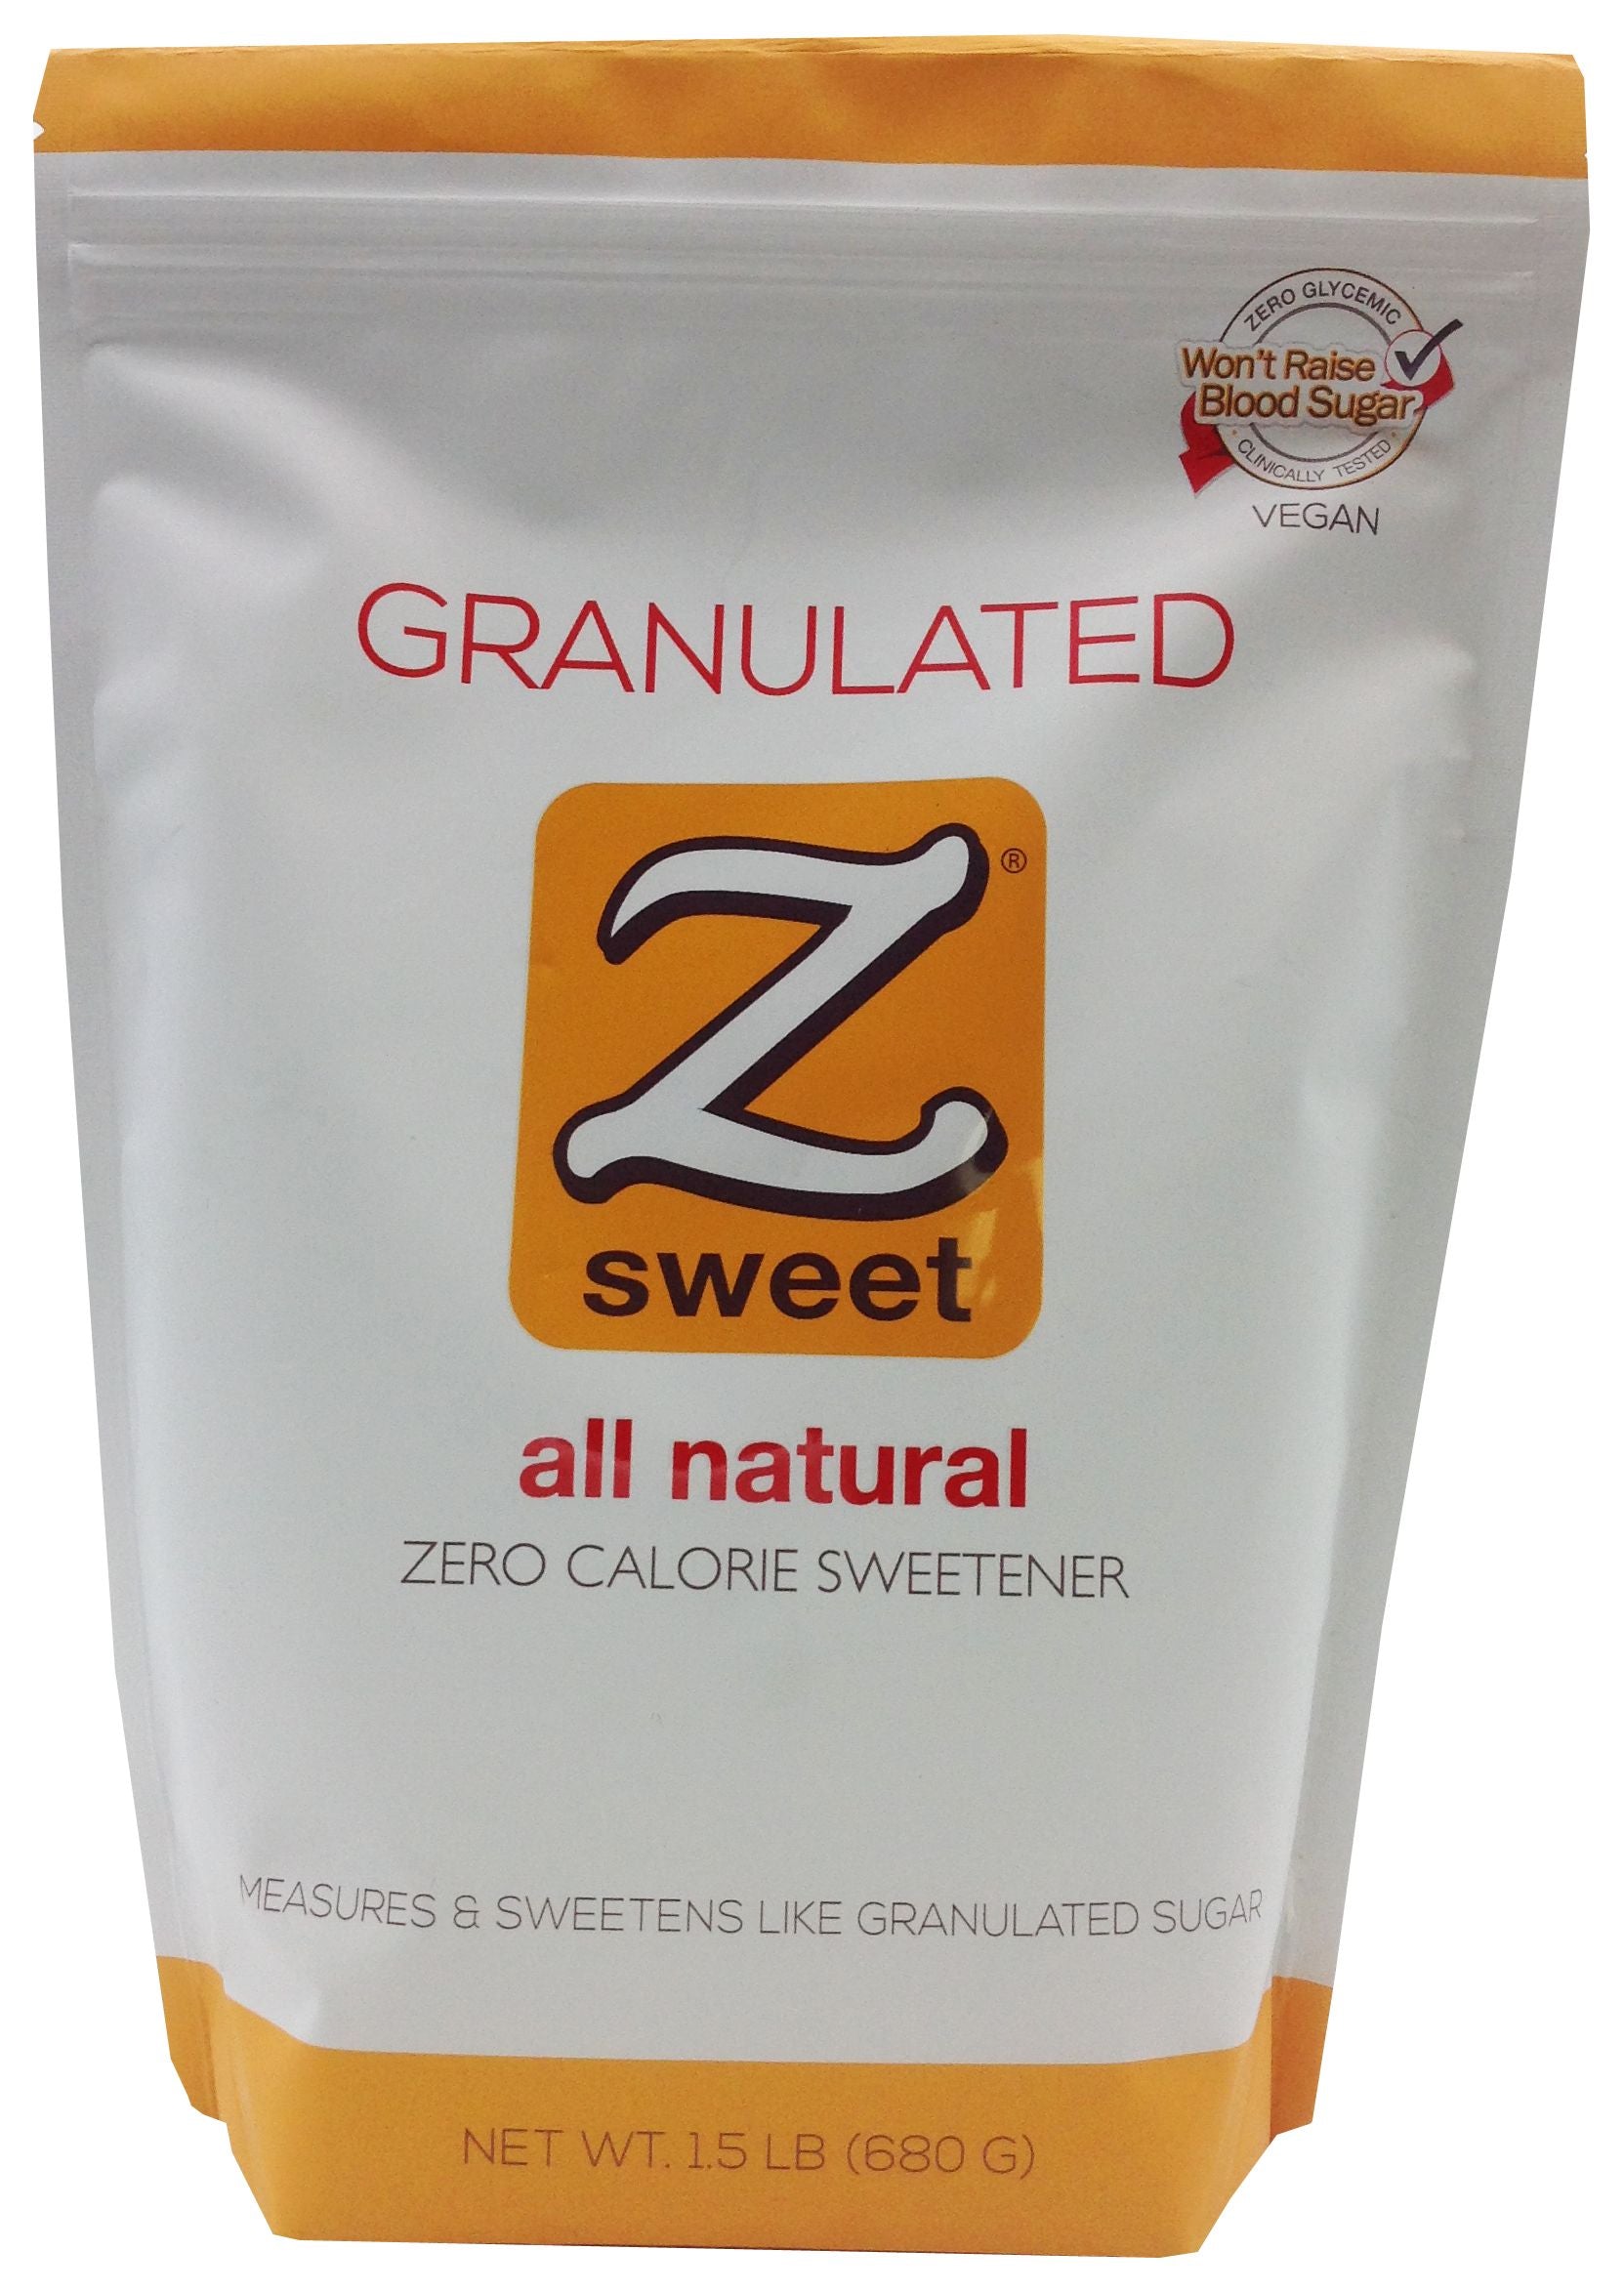 #Flavor_Granulated #Size_1.5 lb.